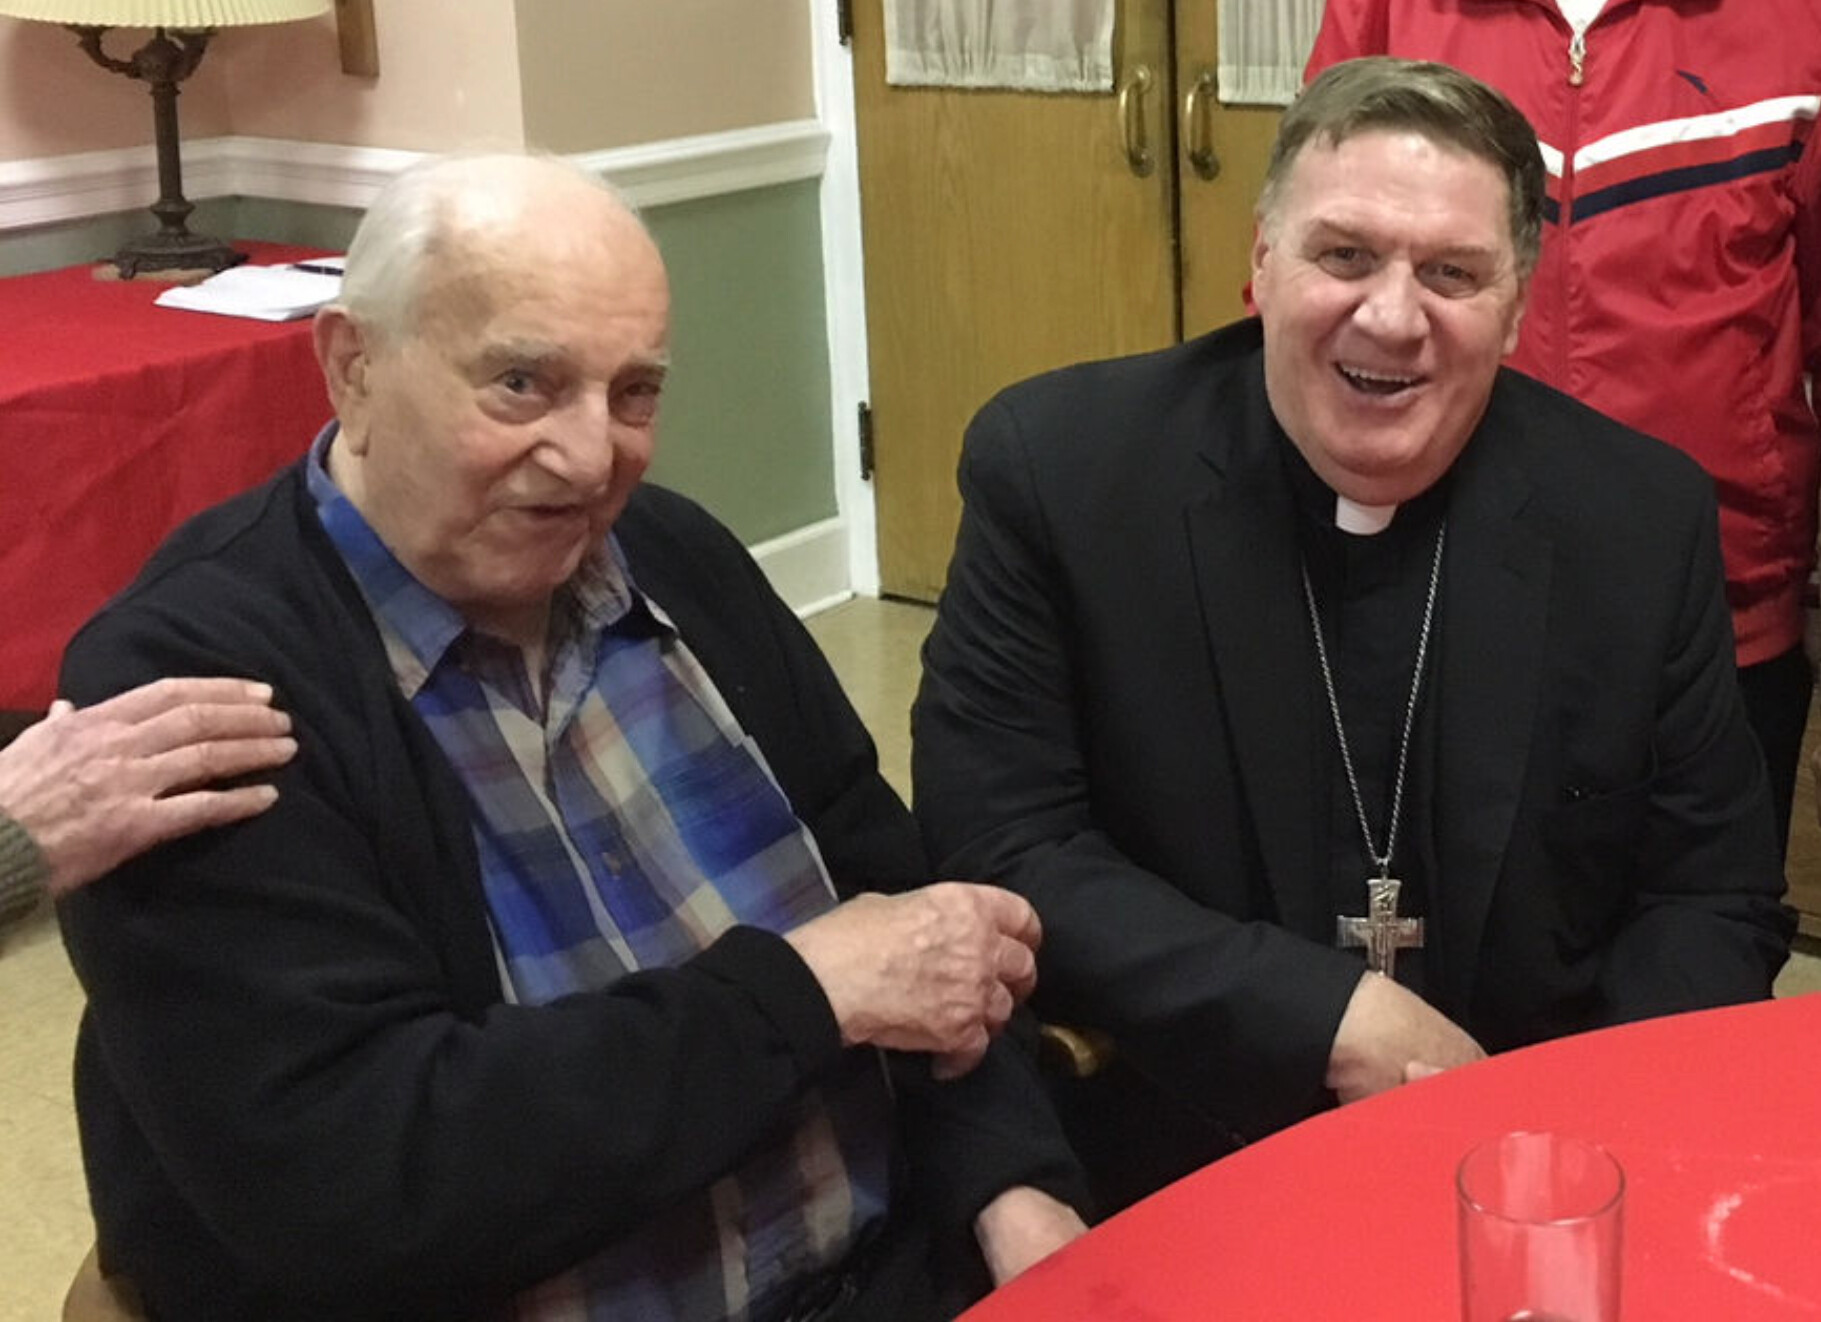 Father Joseph F. Coda, left, is pictured with Cardinal Joseph W. Tobin, C.Ss.R., in 2018.